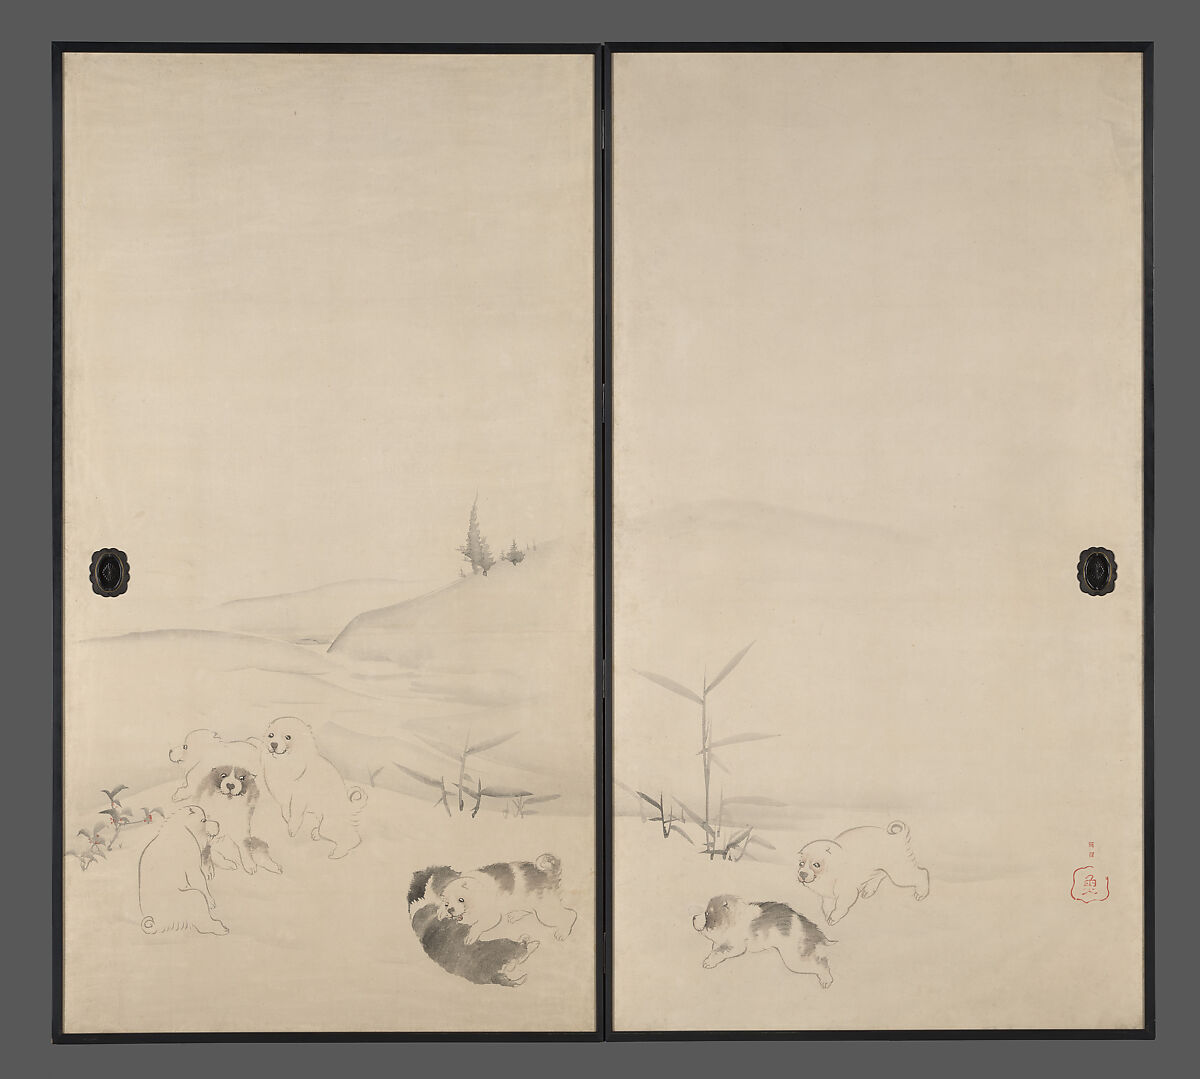 Puppies in the Snow, Nagasawa Rosetsu 長澤蘆雪  Japanese, Set of four sliding panels mounted as a pair of two-panel screens; ink and color on paper, Japan